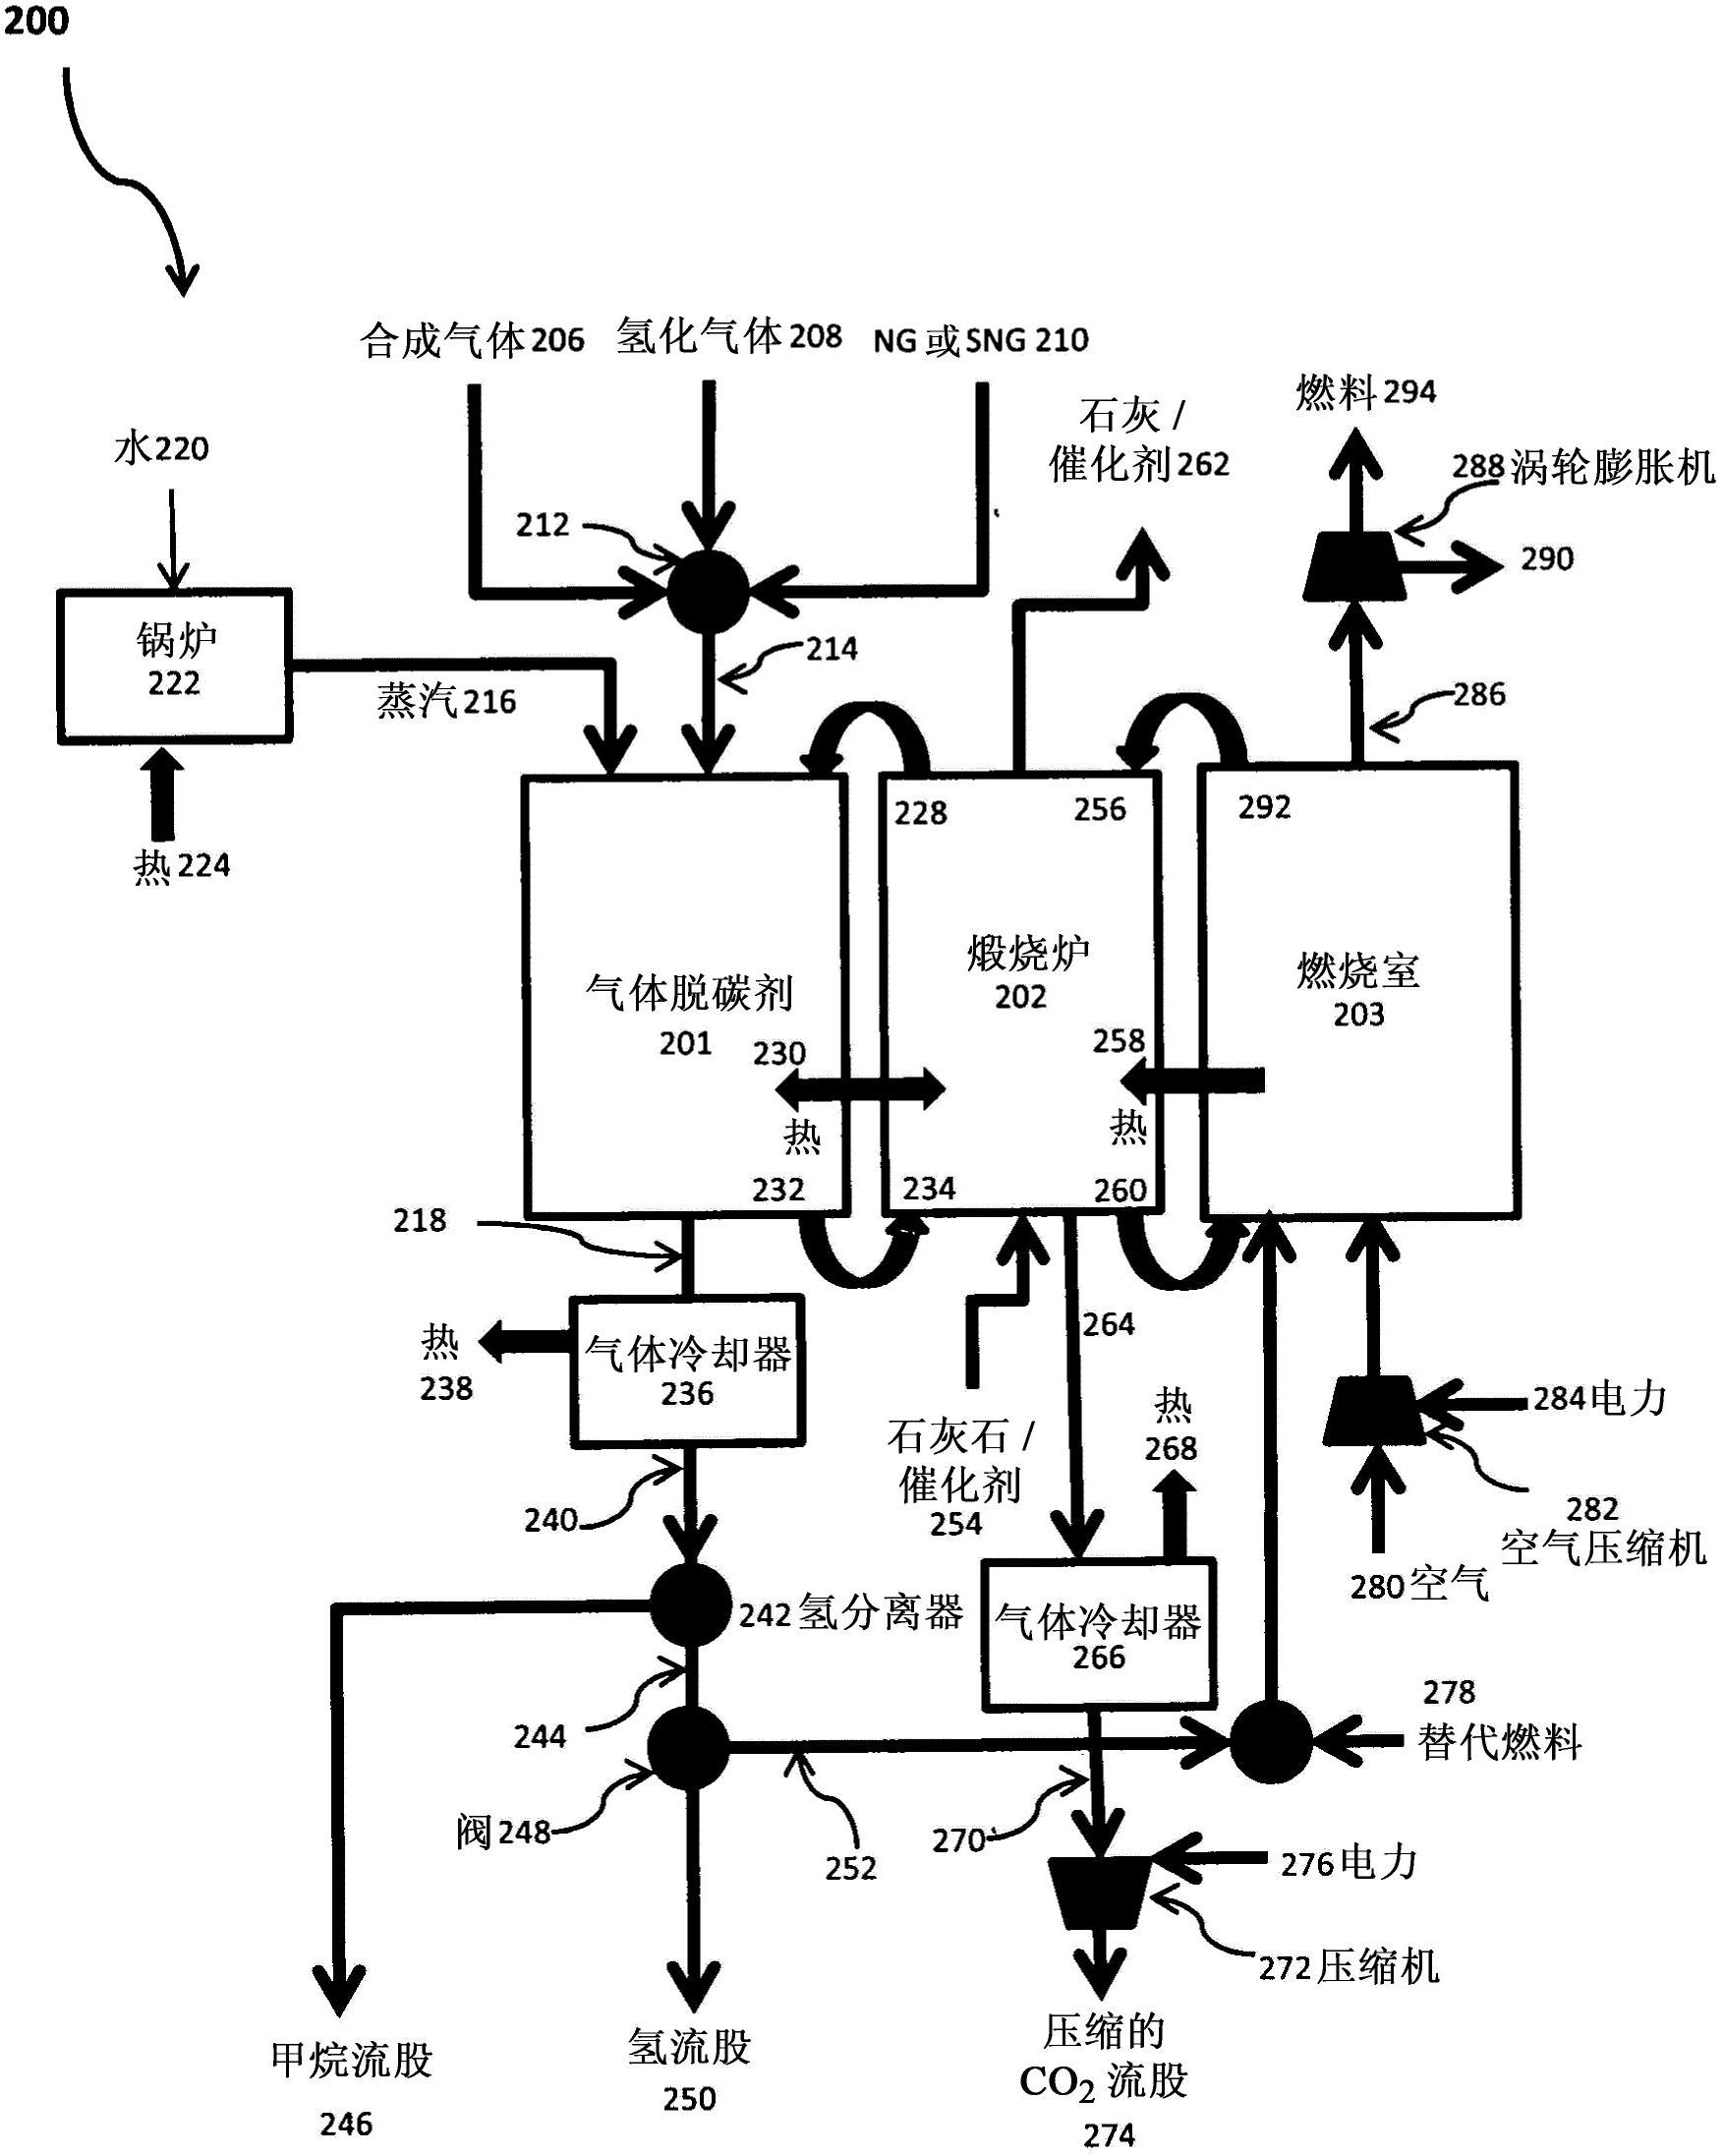 System and method for processing an input fuel gas and steam to produce carbon dioxide and an output fuel gas